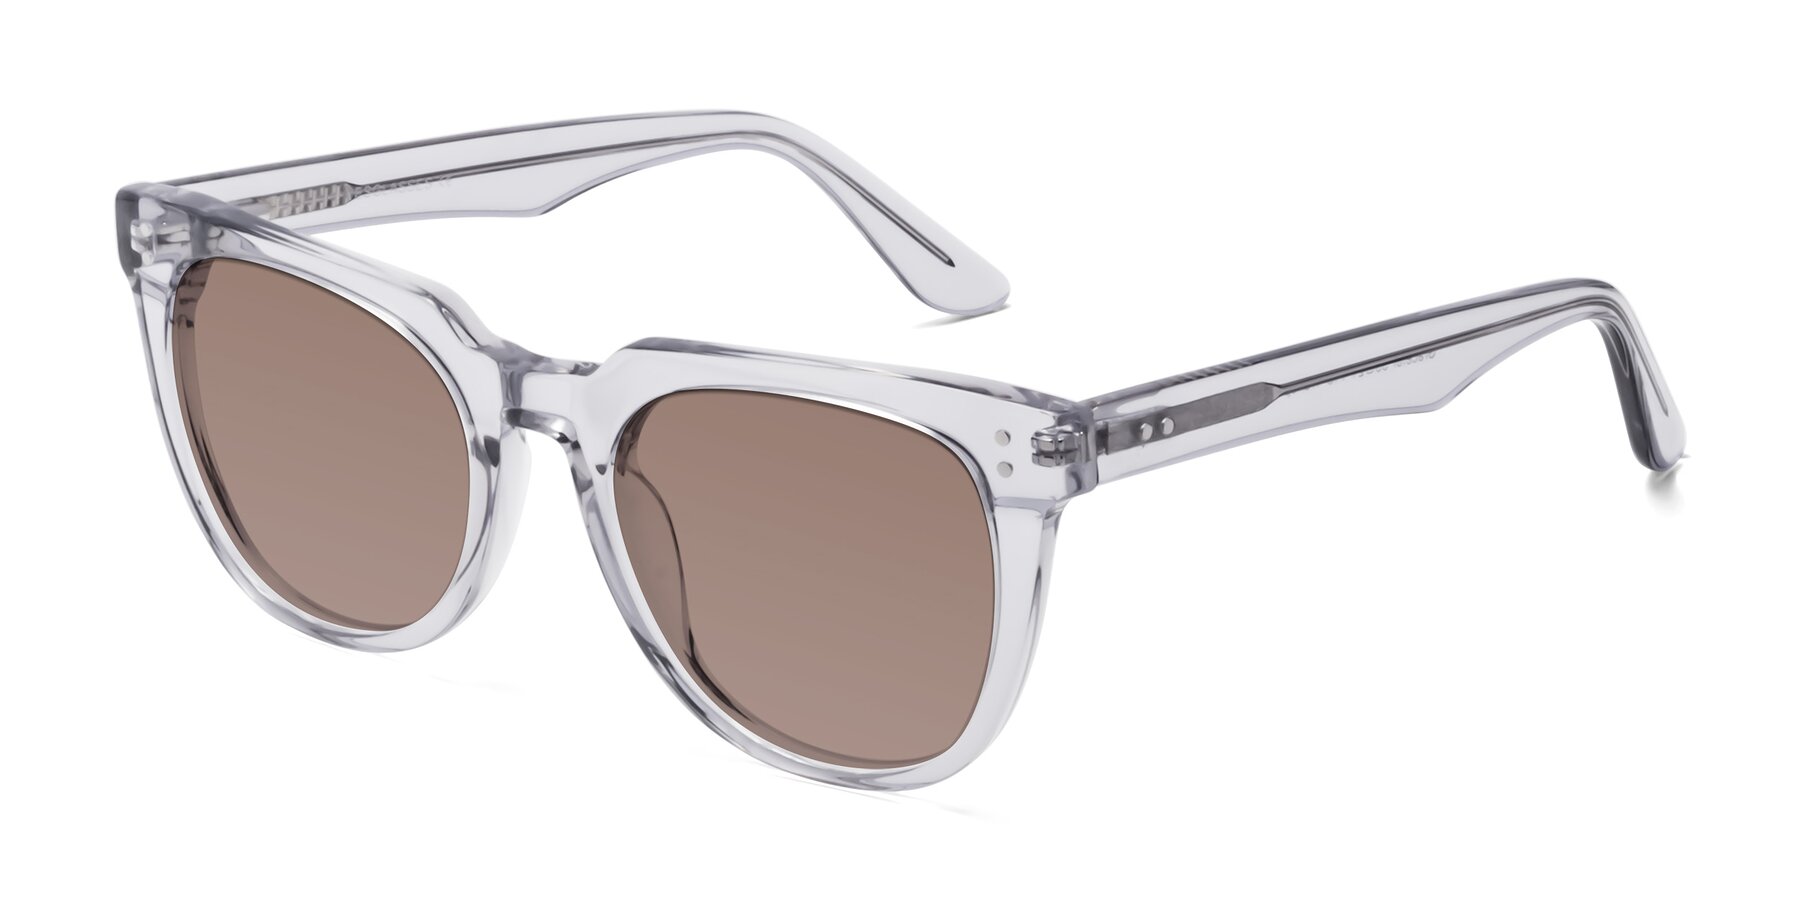 Angle of Graceful in Transprent Gray with Medium Brown Tinted Lenses